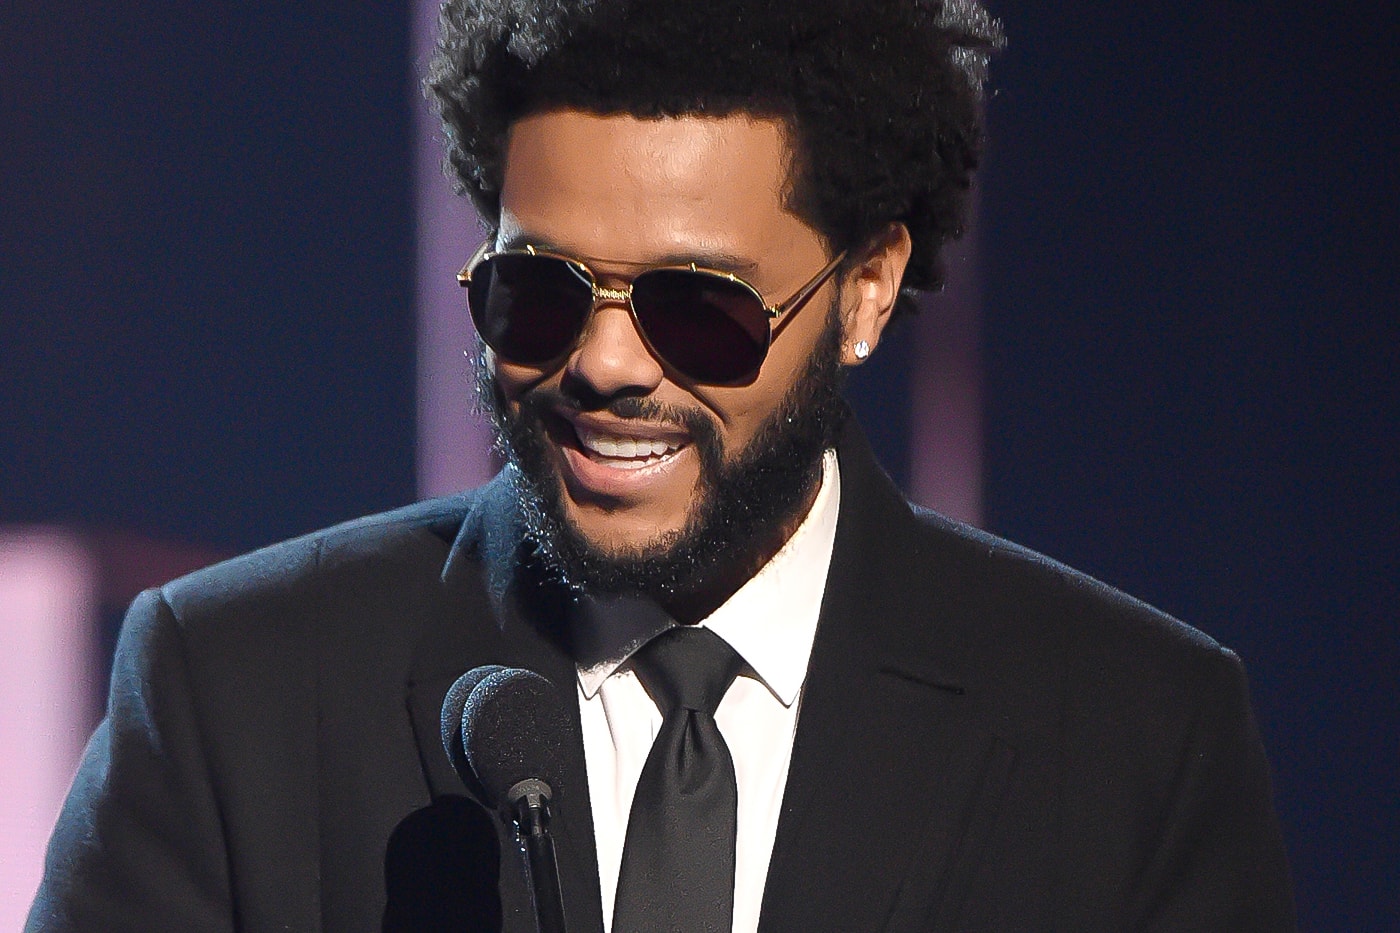 The Weeknd Blinding Lights Longest Charting Billboard Hot 100 after hours